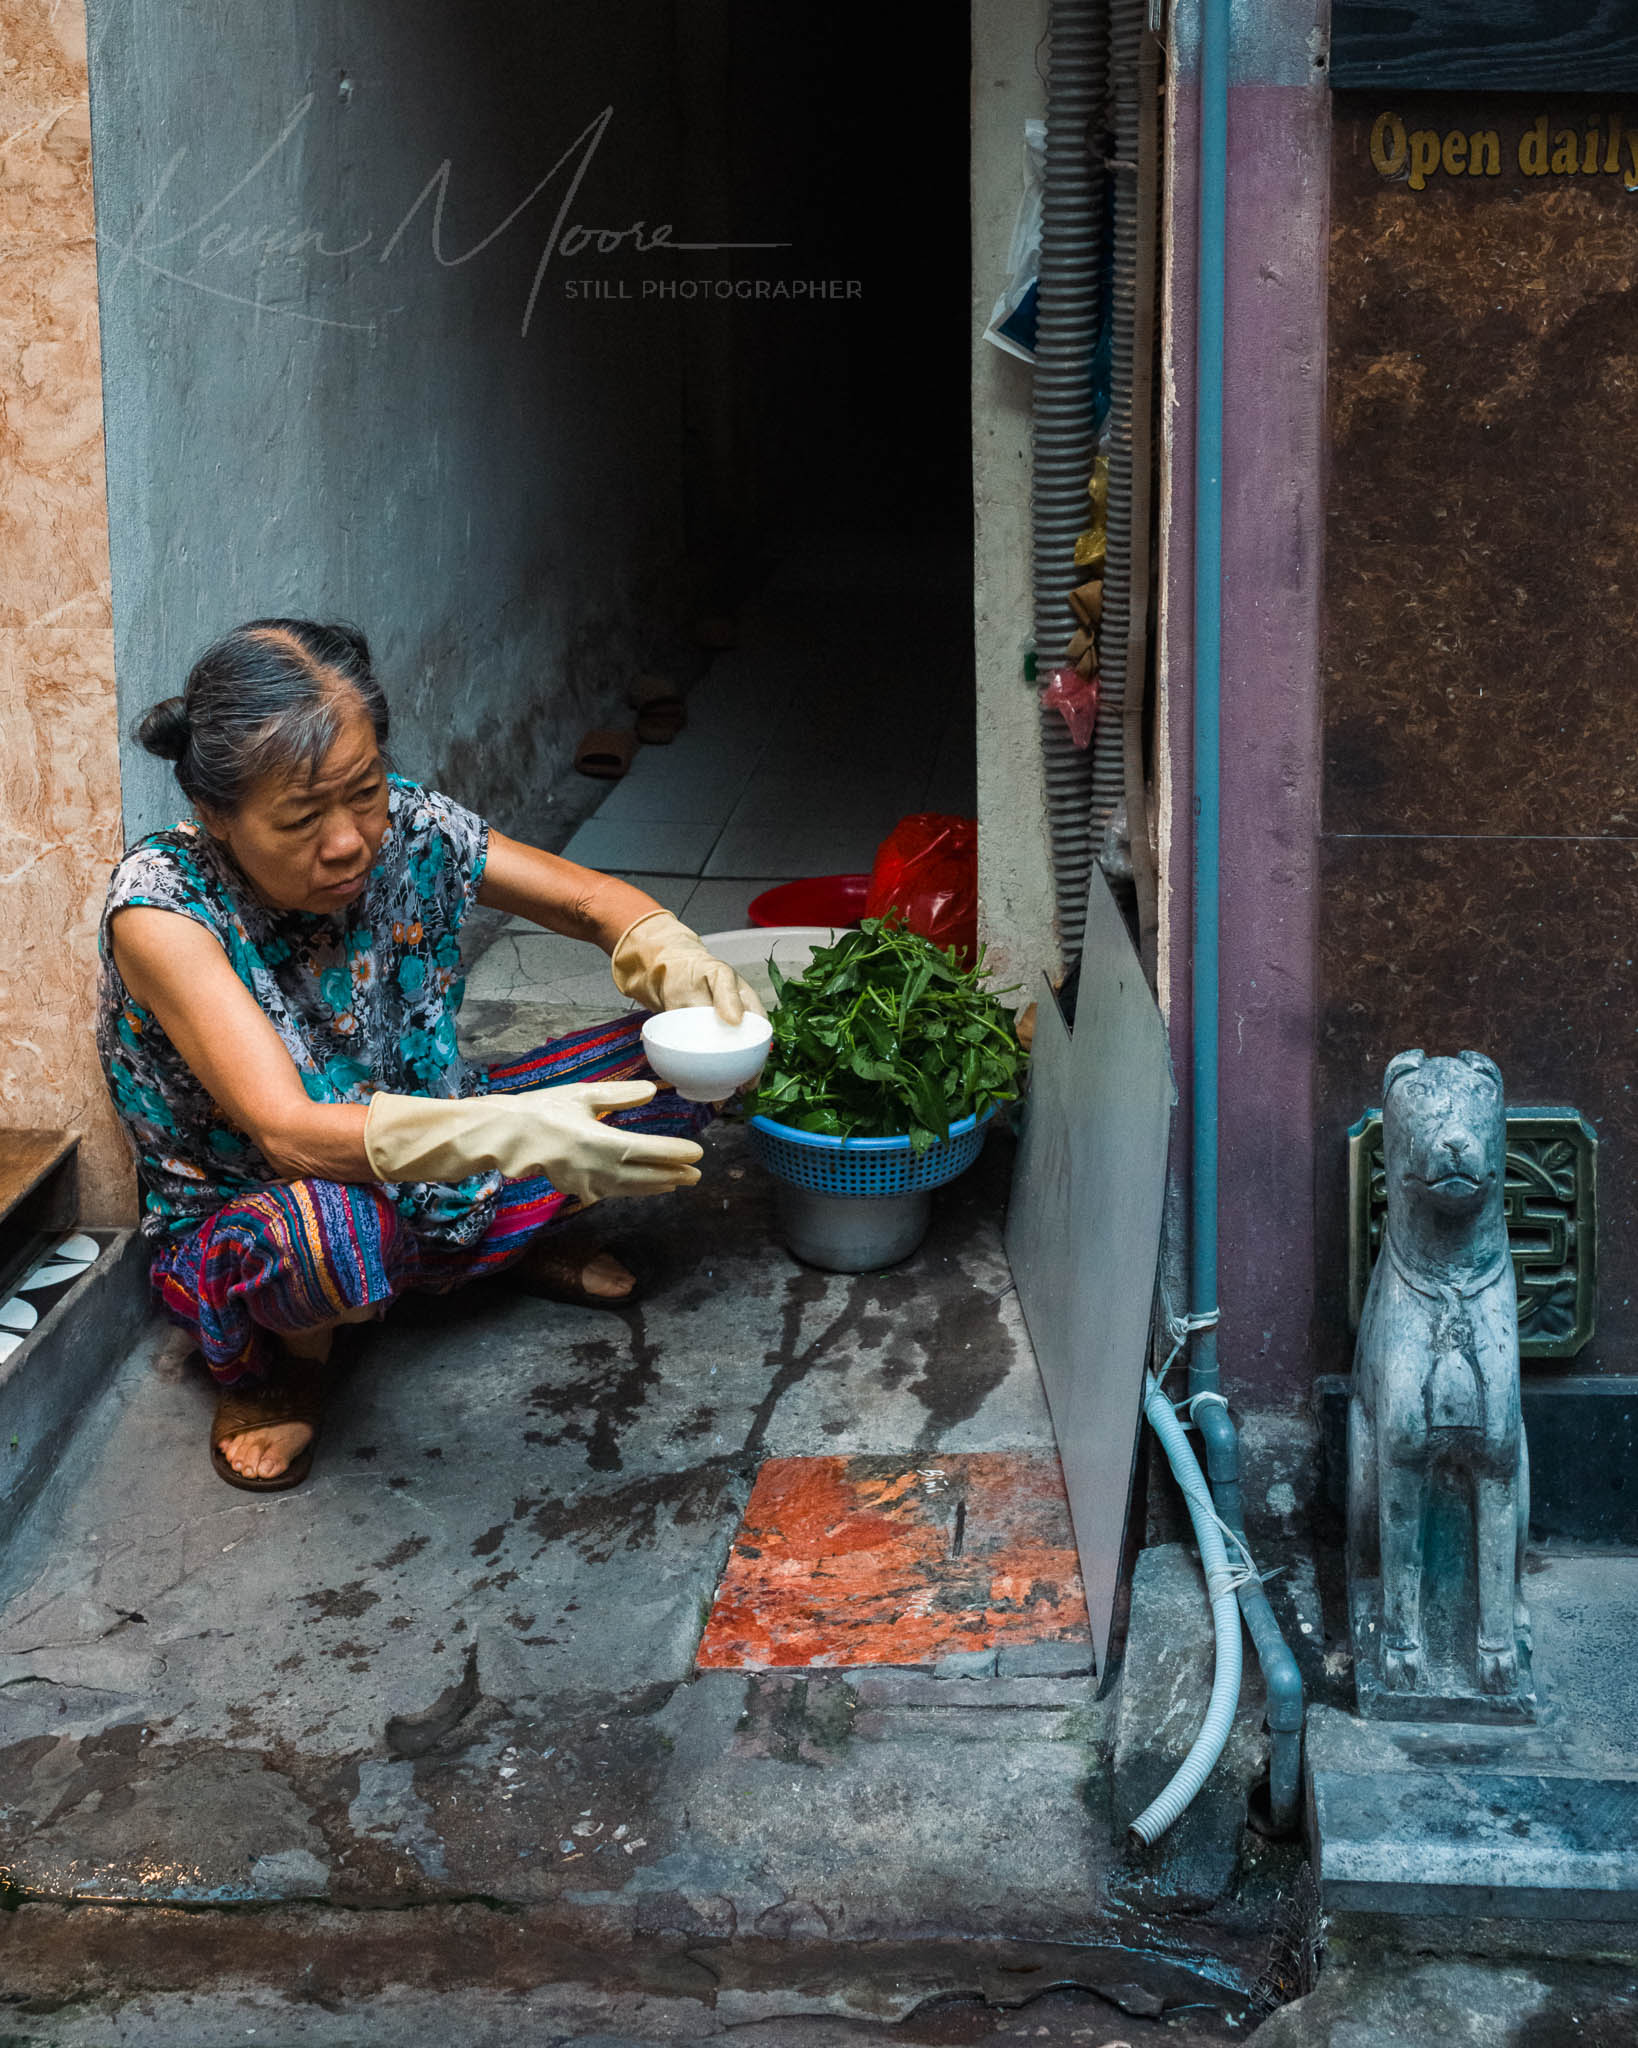 Vietnamese woman in traditional attire preparing vegetables in a rustic setting.